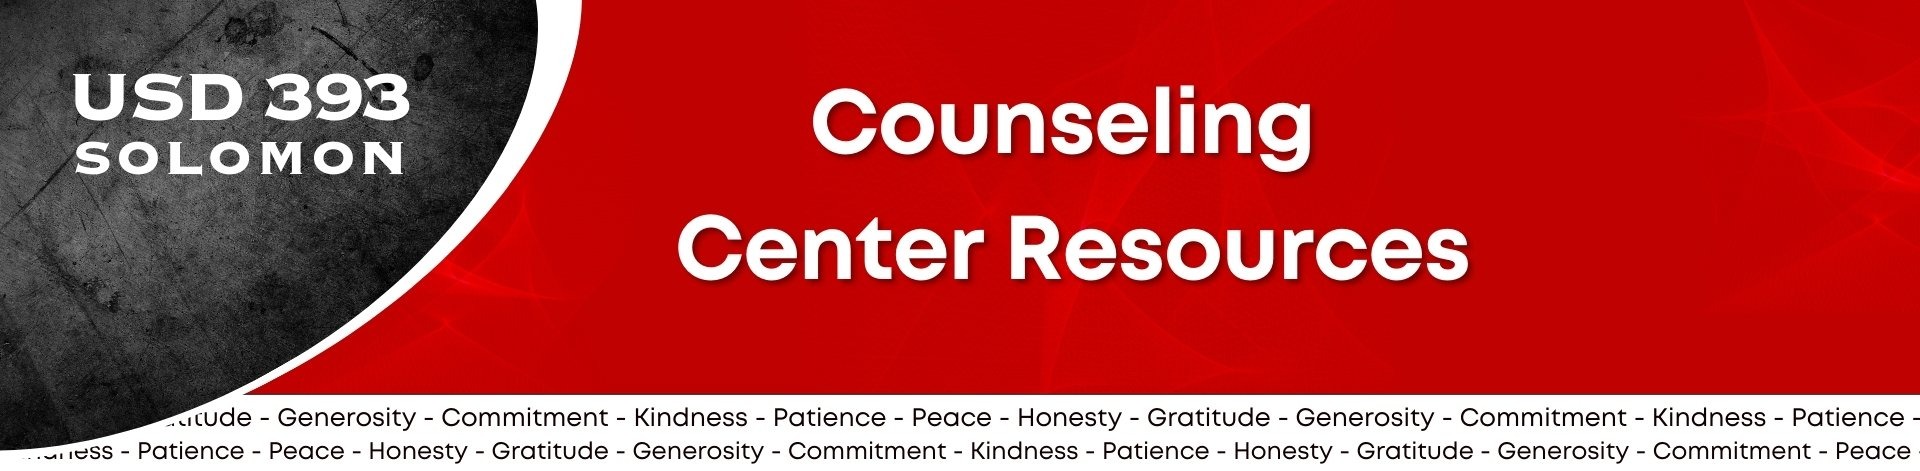 Counseling Center Resources Graphic